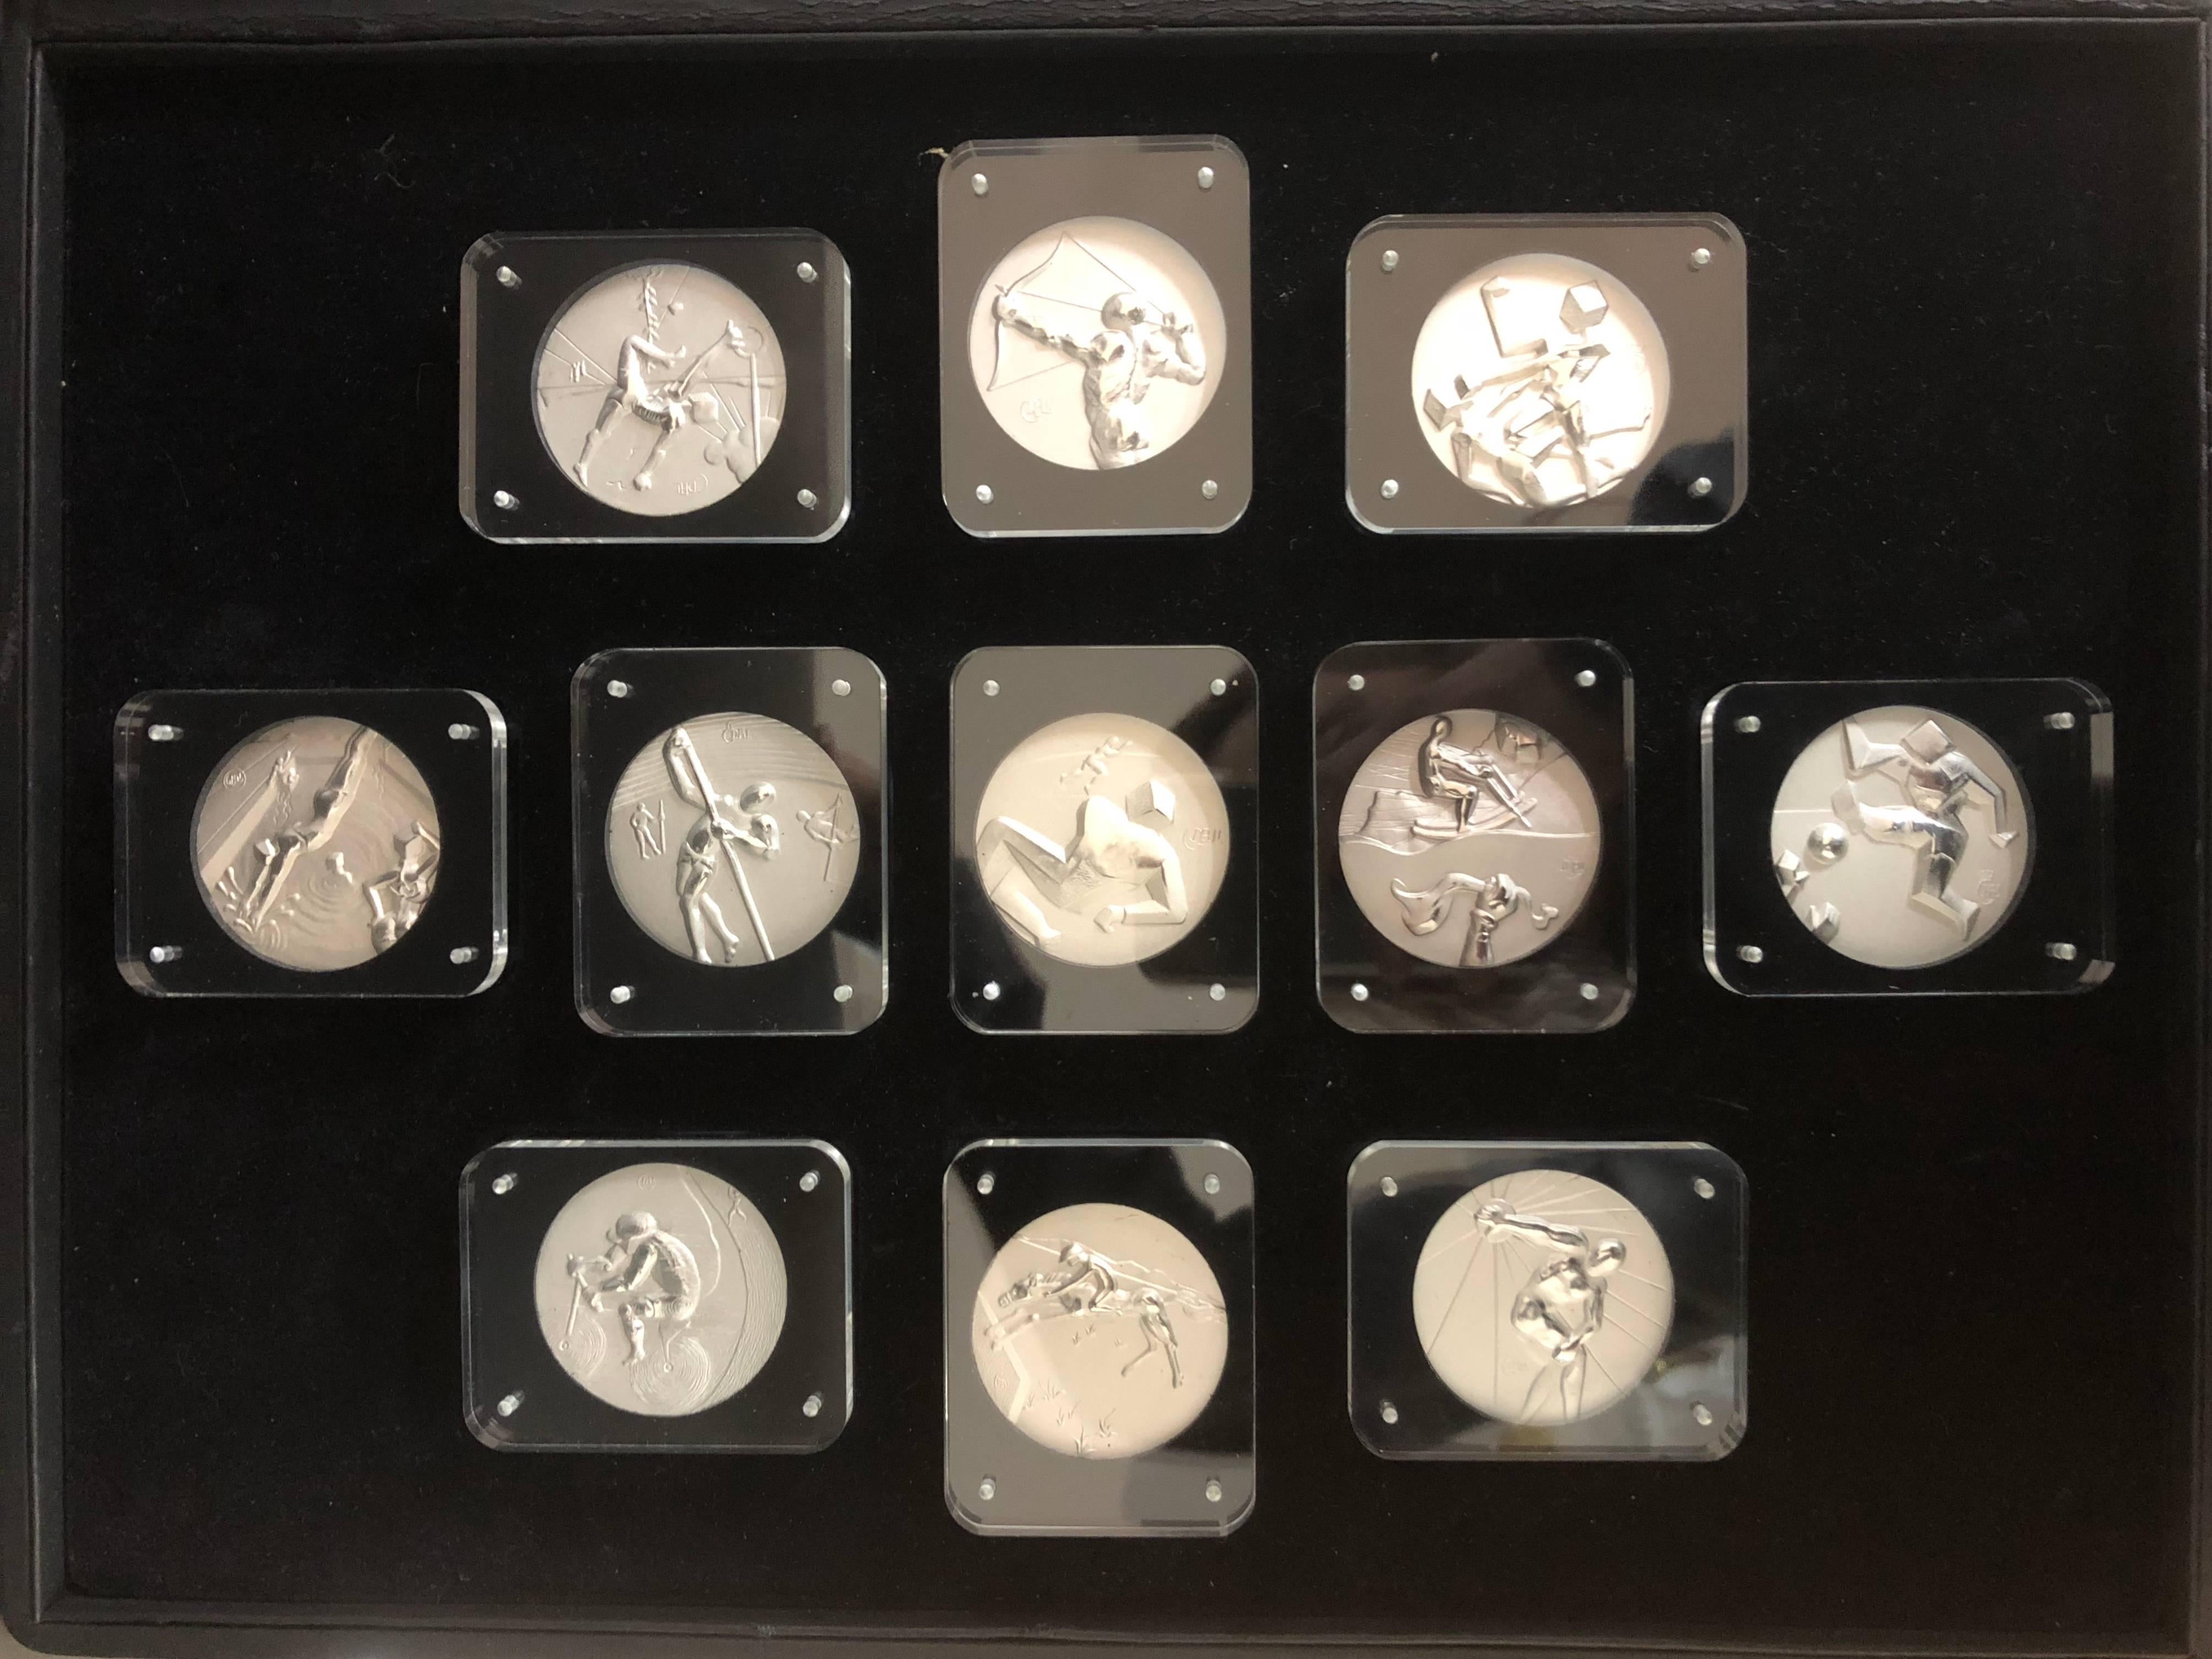 Complete Set of 1984 Olympic Medallions - Art by Salvador Dalí